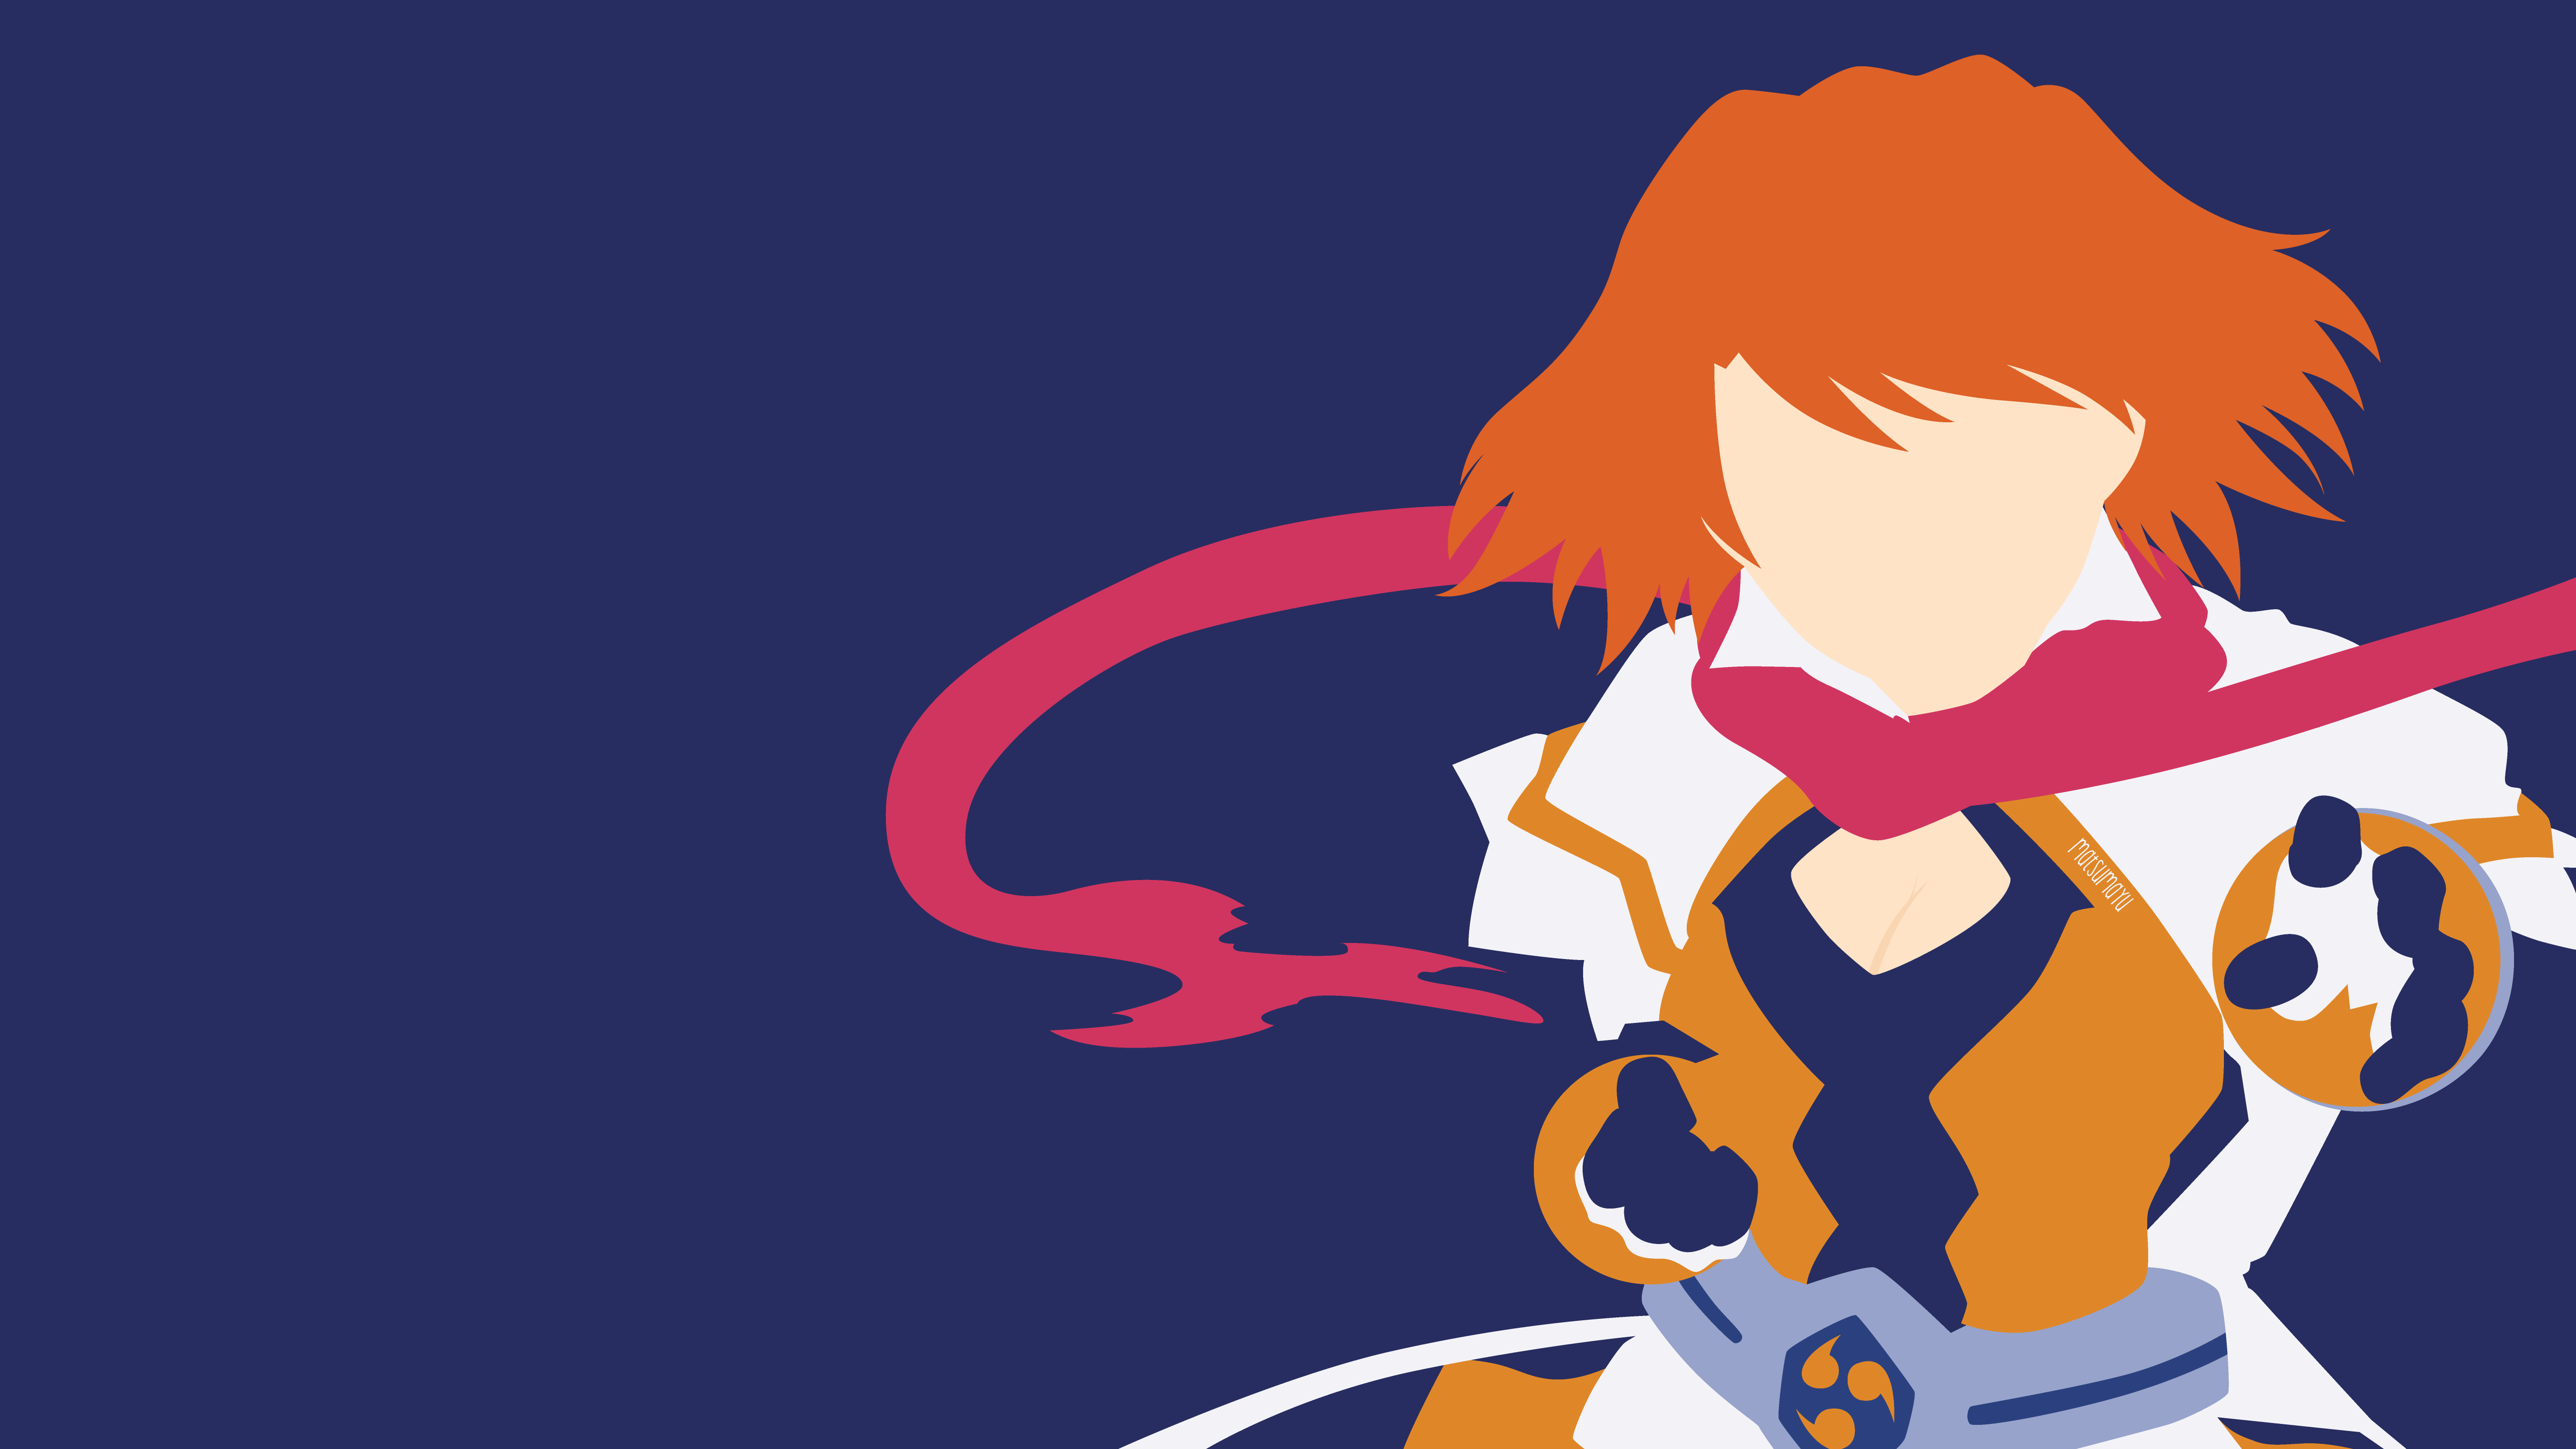 My-Hime Wallpapers